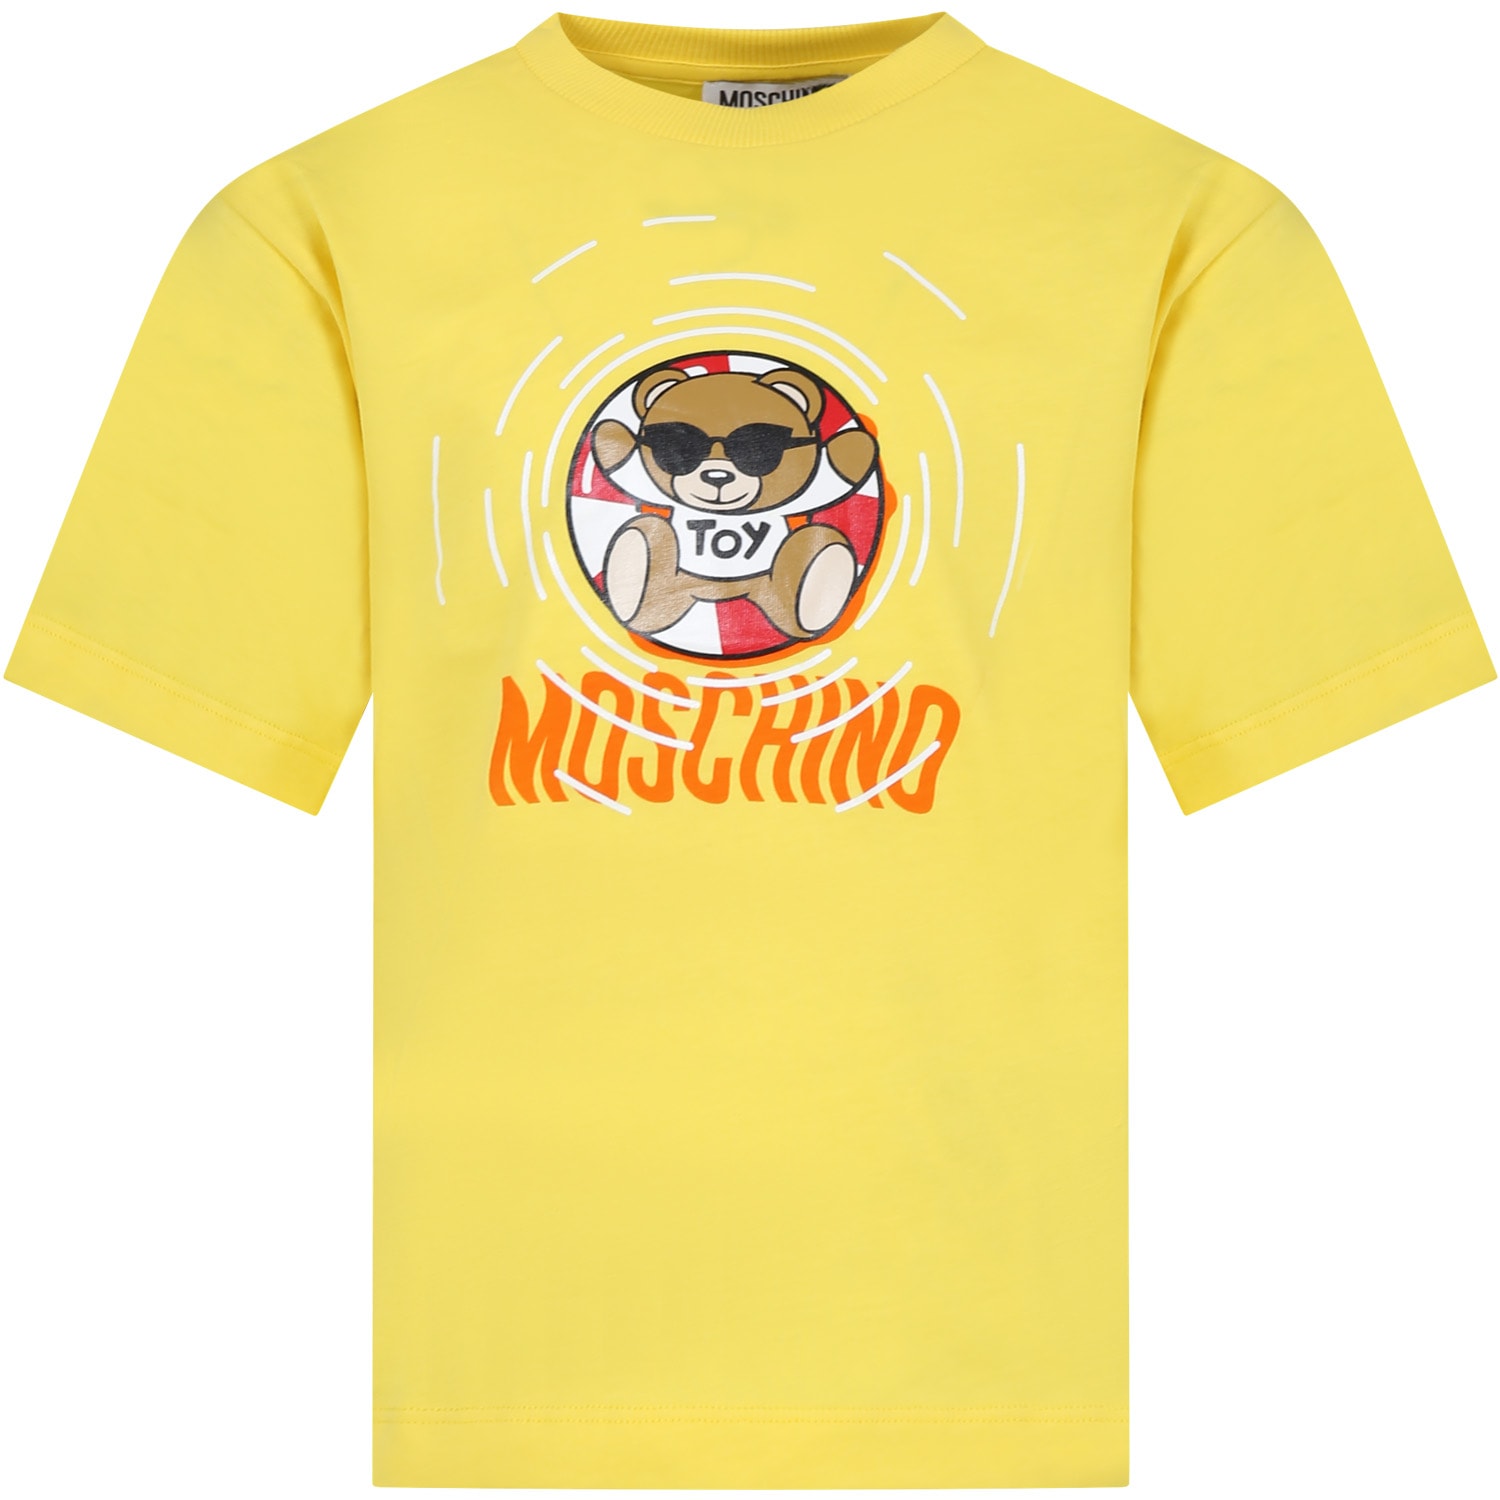 Moschino Yellow T-shirt For Kids With Multicolored Print And Teddy Bear